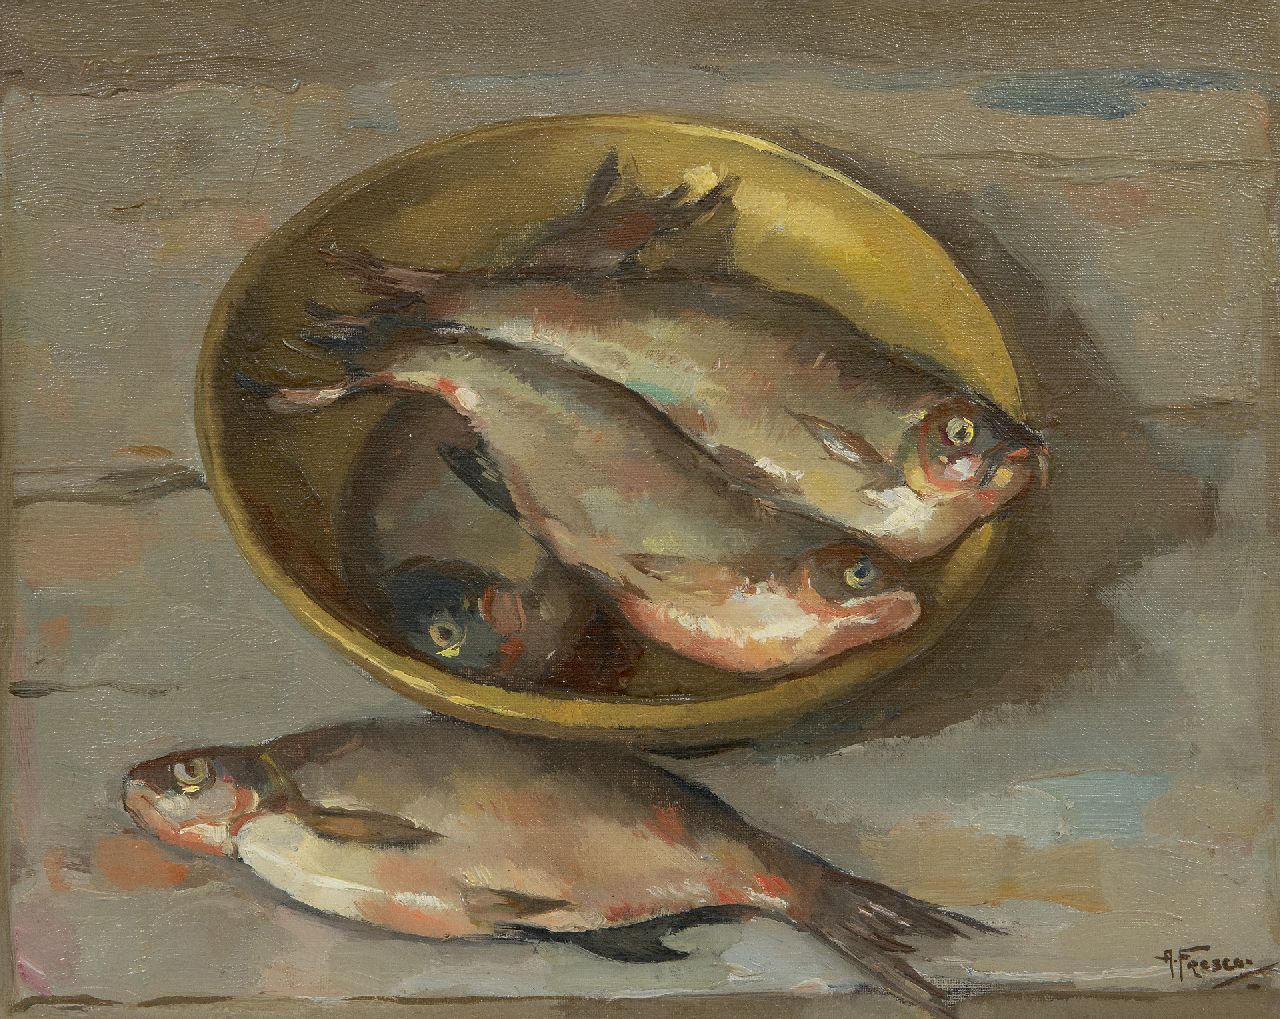 Abraham Fresco | Herring in a bowl, oil on canvas, 33.2 x 40.6 cm, signed l.r.